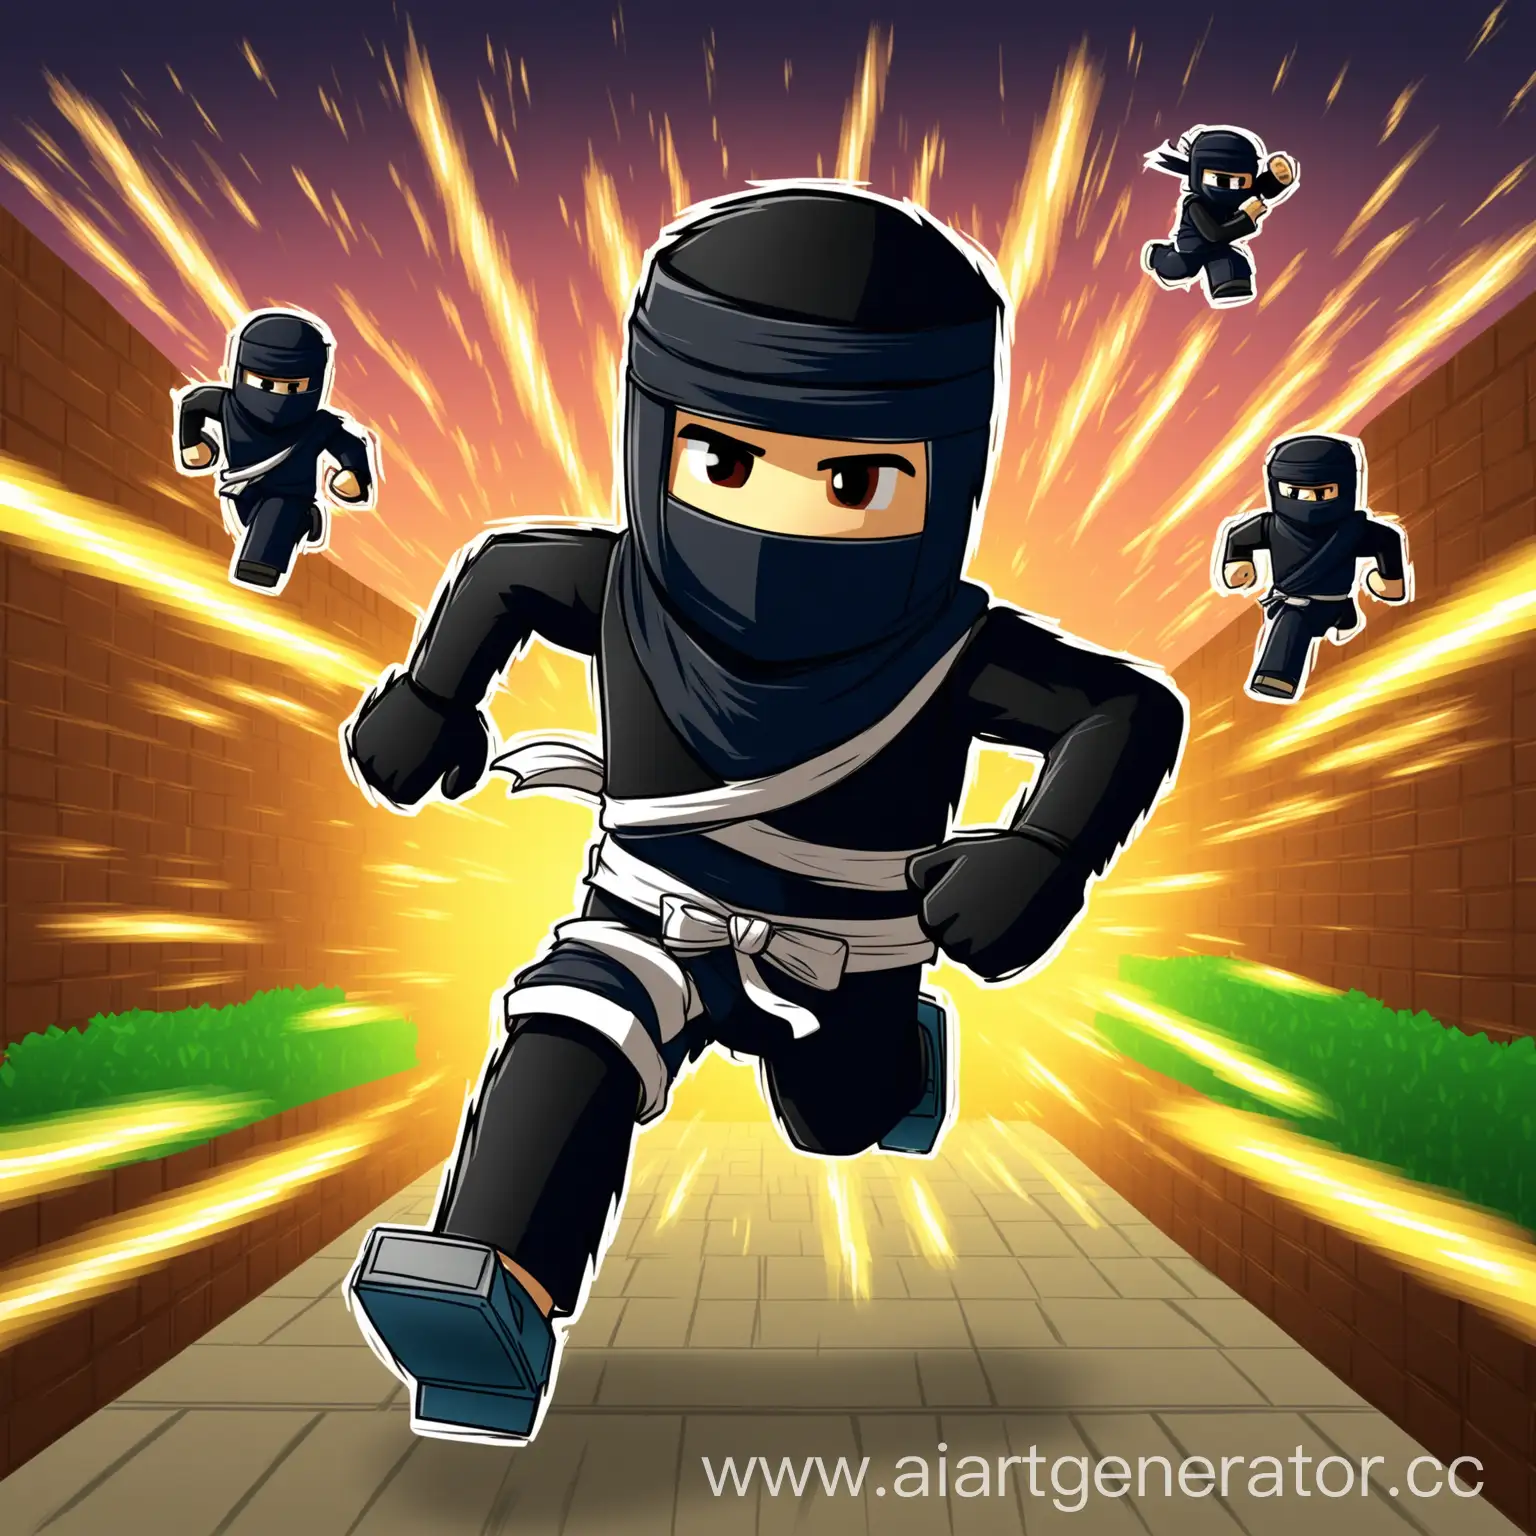 Running ninja roblox drawing with a variety of backgrounds and effects
